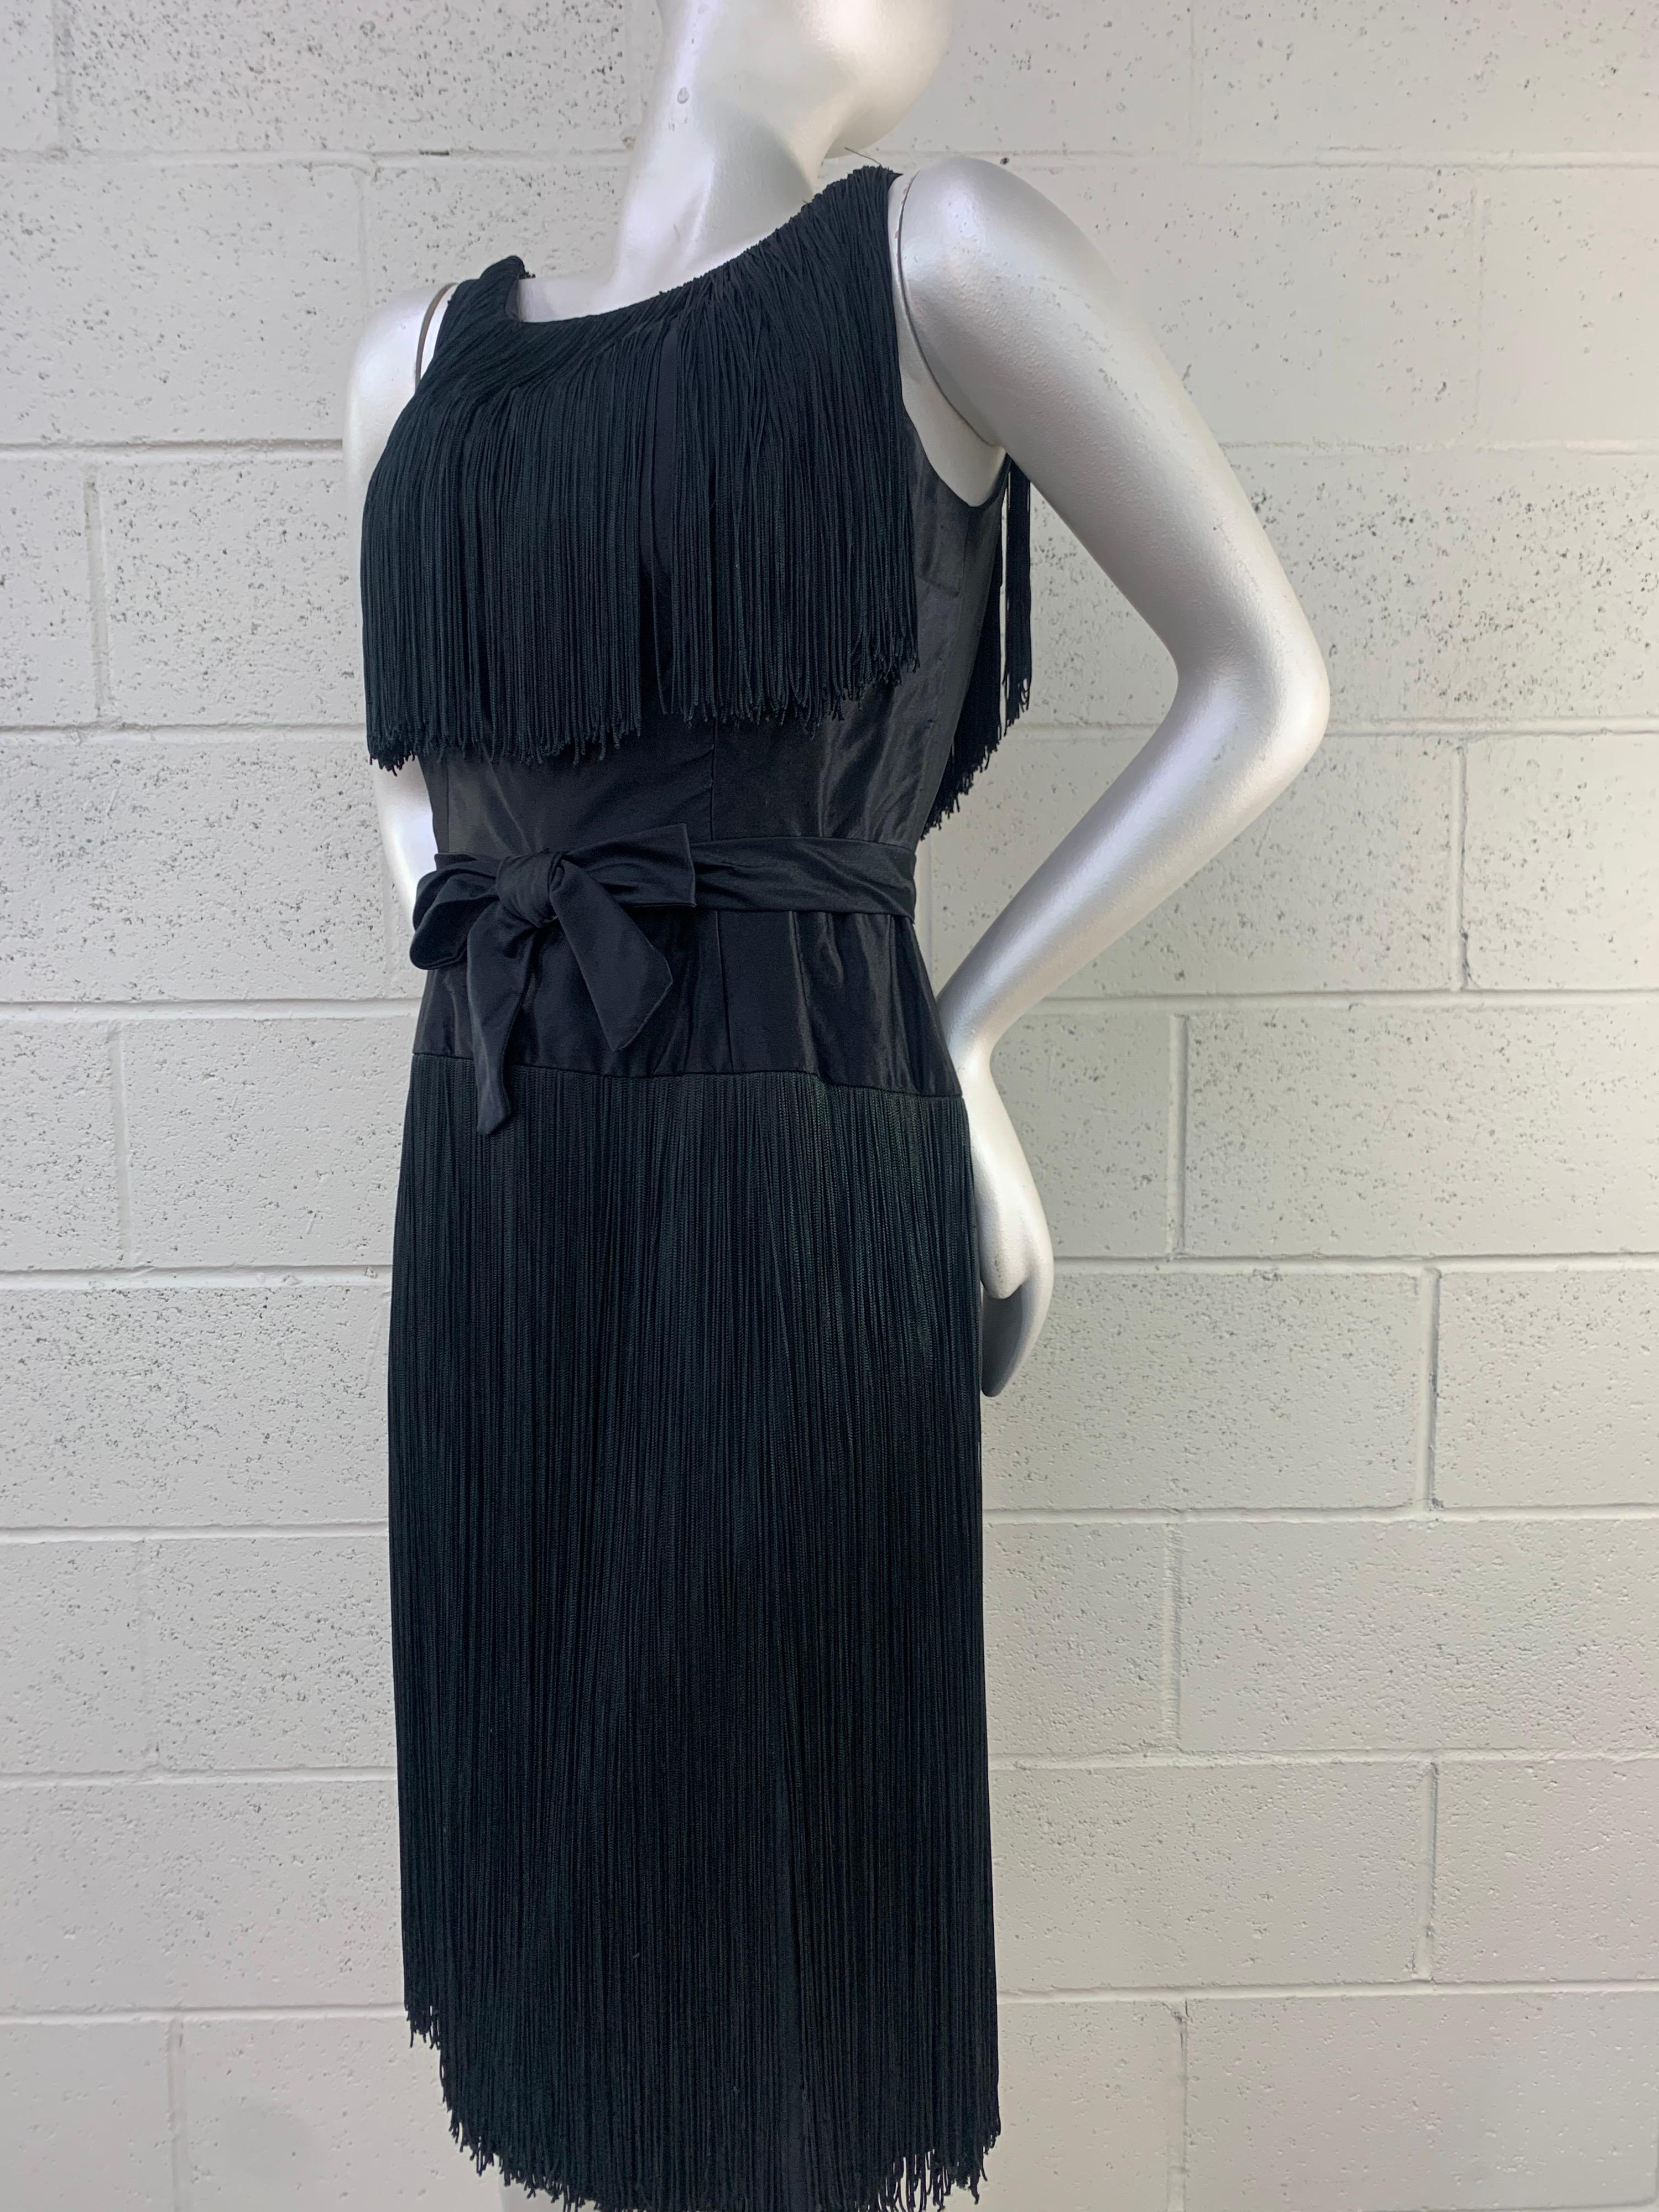 1961 Saks Fifth Avenue Black Satin Sheath Dress w/ Heavy Long Fringe: Smooth silk satin waistline with constructed bow. Made to order through Saks Fifth Avenue. Size 8